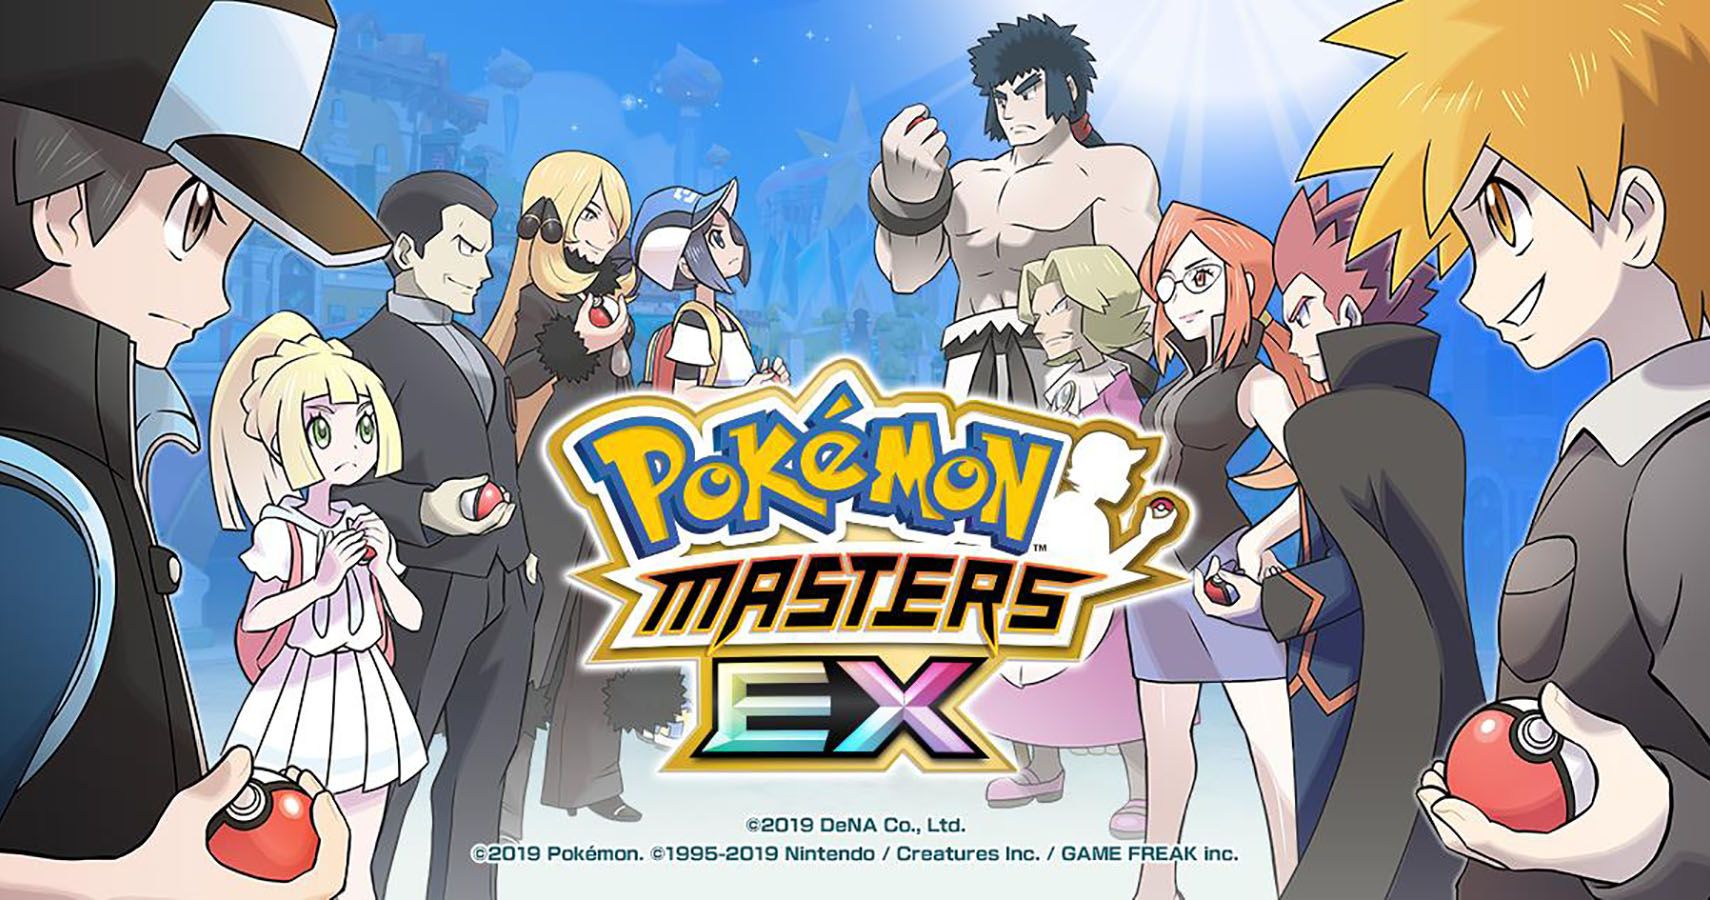 Pokémon Masters EX Accumulated 75 Million From Player Spending During